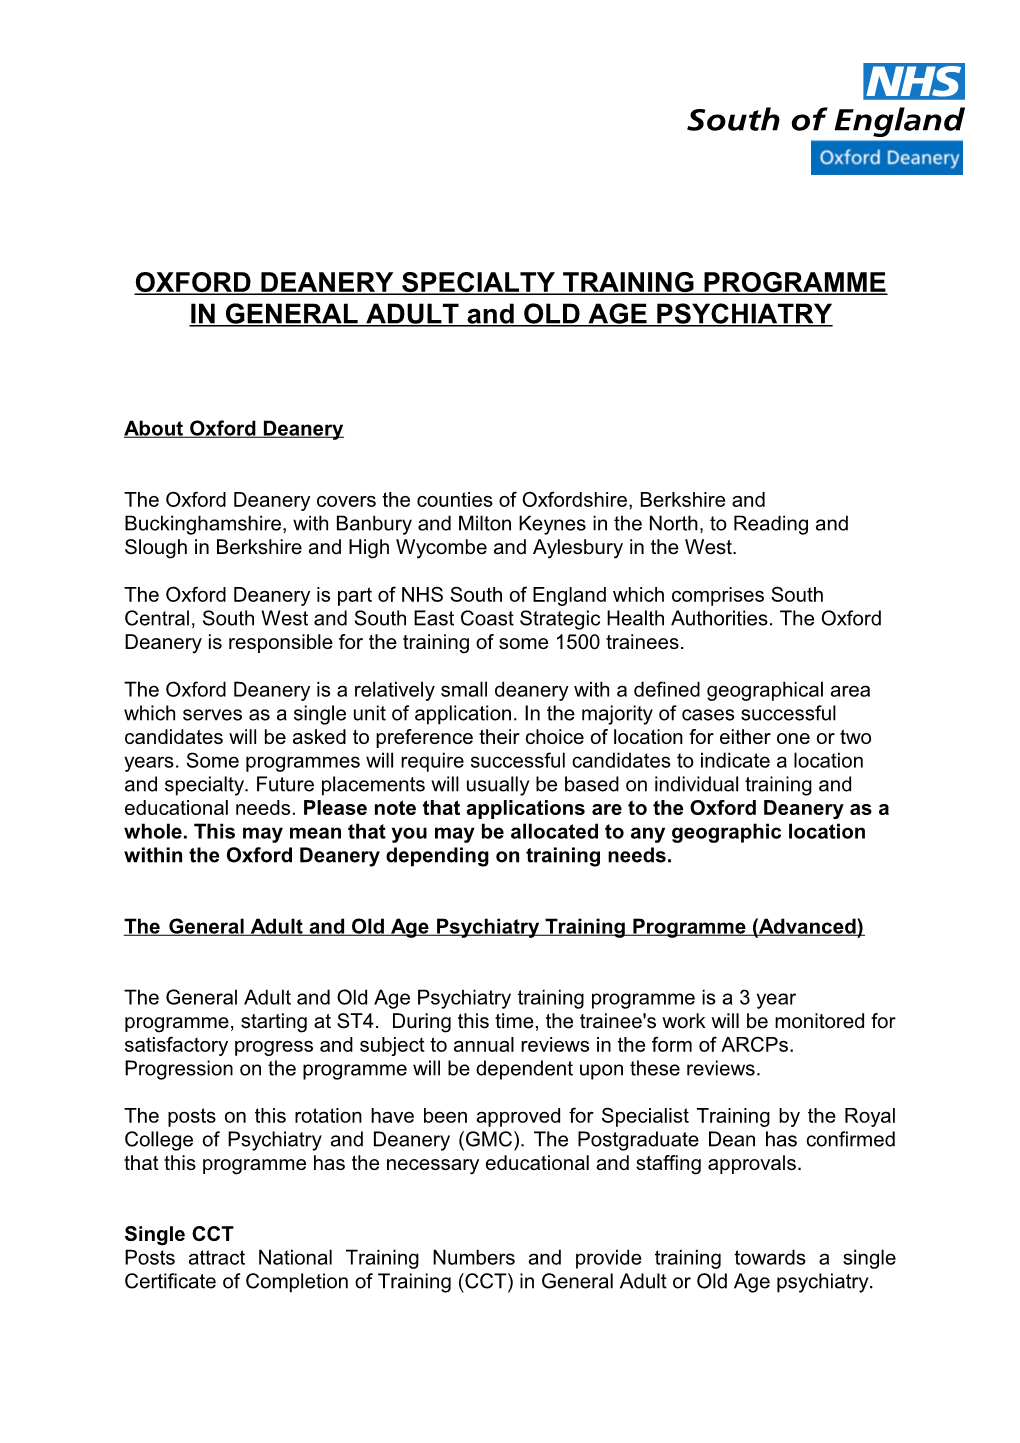 OXFORD DEANERY SPECIALTY TRAINING PROGRAMME in General Adult and Old Age Psychiatry